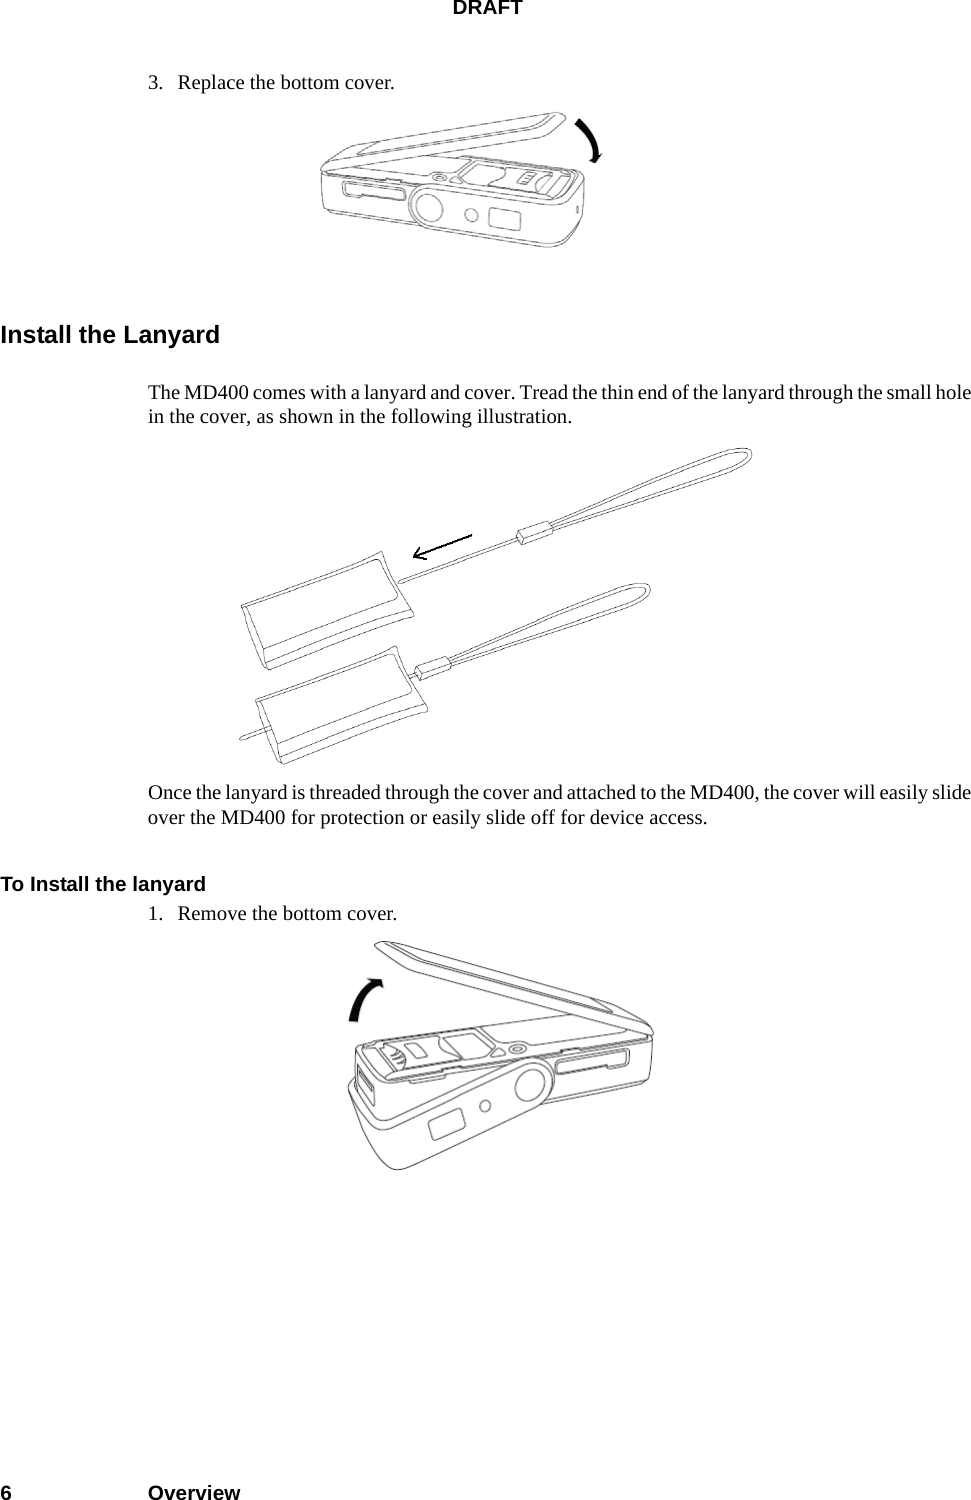 DRAFT6Overview3. Replace the bottom cover.Install the LanyardThe MD400 comes with a lanyard and cover. Tread the thin end of the lanyard through the small hole in the cover, as shown in the following illustration. Once the lanyard is threaded through the cover and attached to the MD400, the cover will easily slide over the MD400 for protection or easily slide off for device access.To Install the lanyard1. Remove the bottom cover.